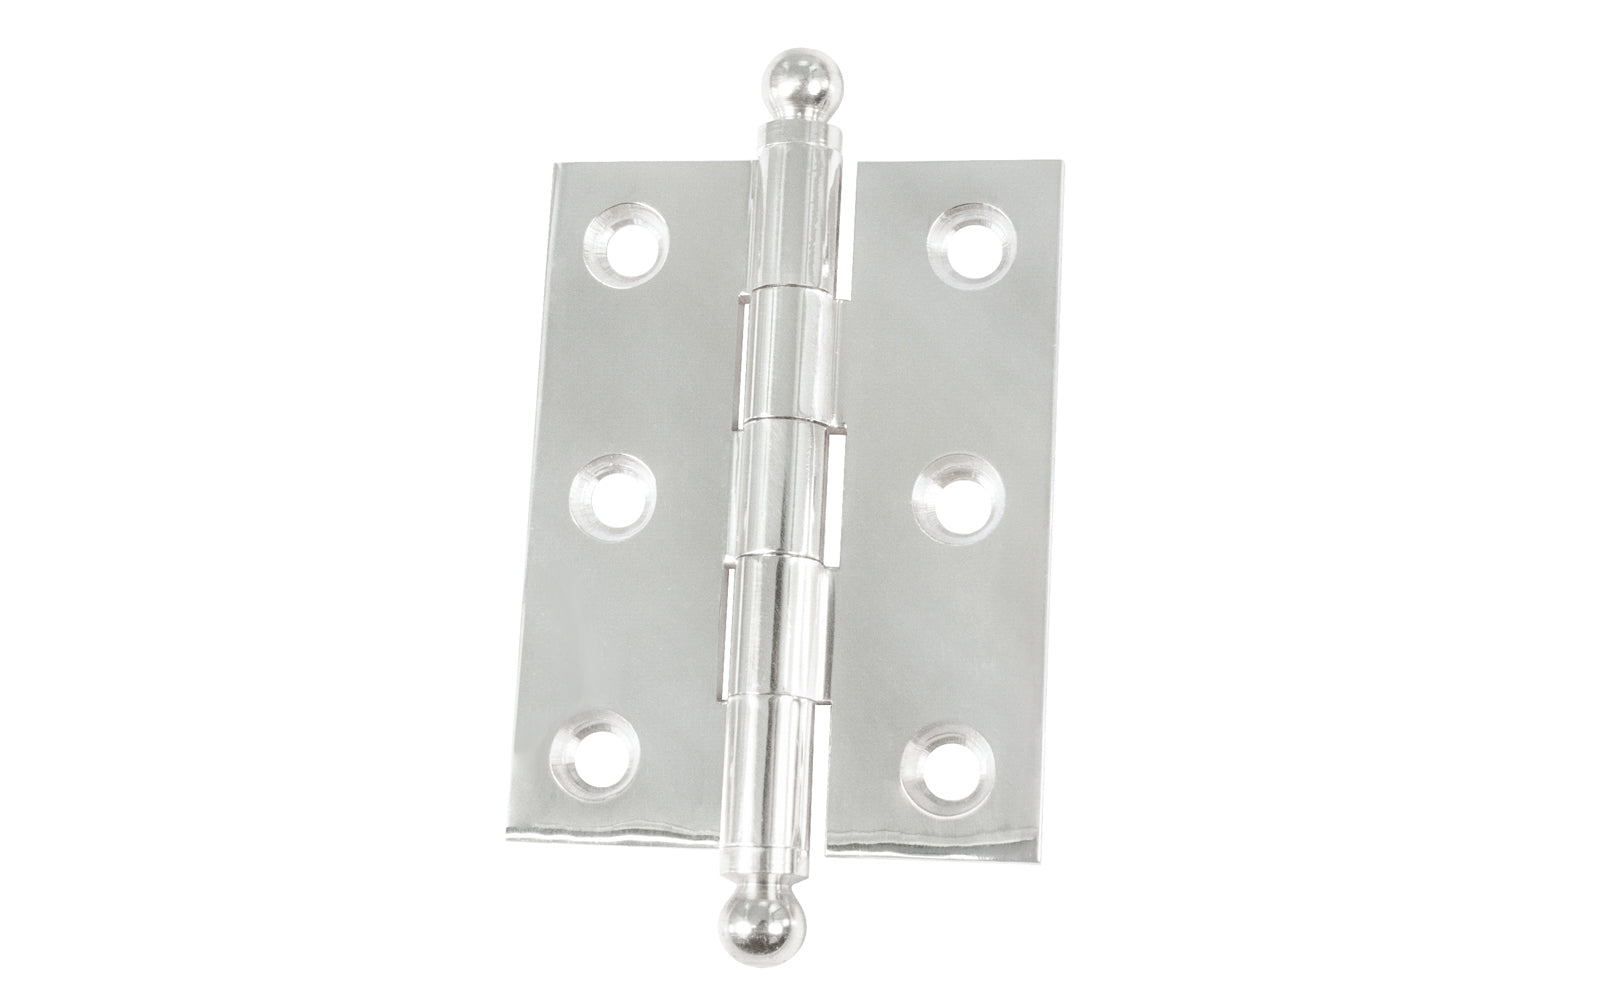 Classic Solid Brass Ball-Tip Cabinet Hinge ~ 2" x 1-1/2". Full mortise extruded hinges. 3/32" heavy duty leaf thickness gauge. Non-removable fixed hinge pin with ball tips. High quality thick cabinet hinge with ball tips. Polished Chrome finish.